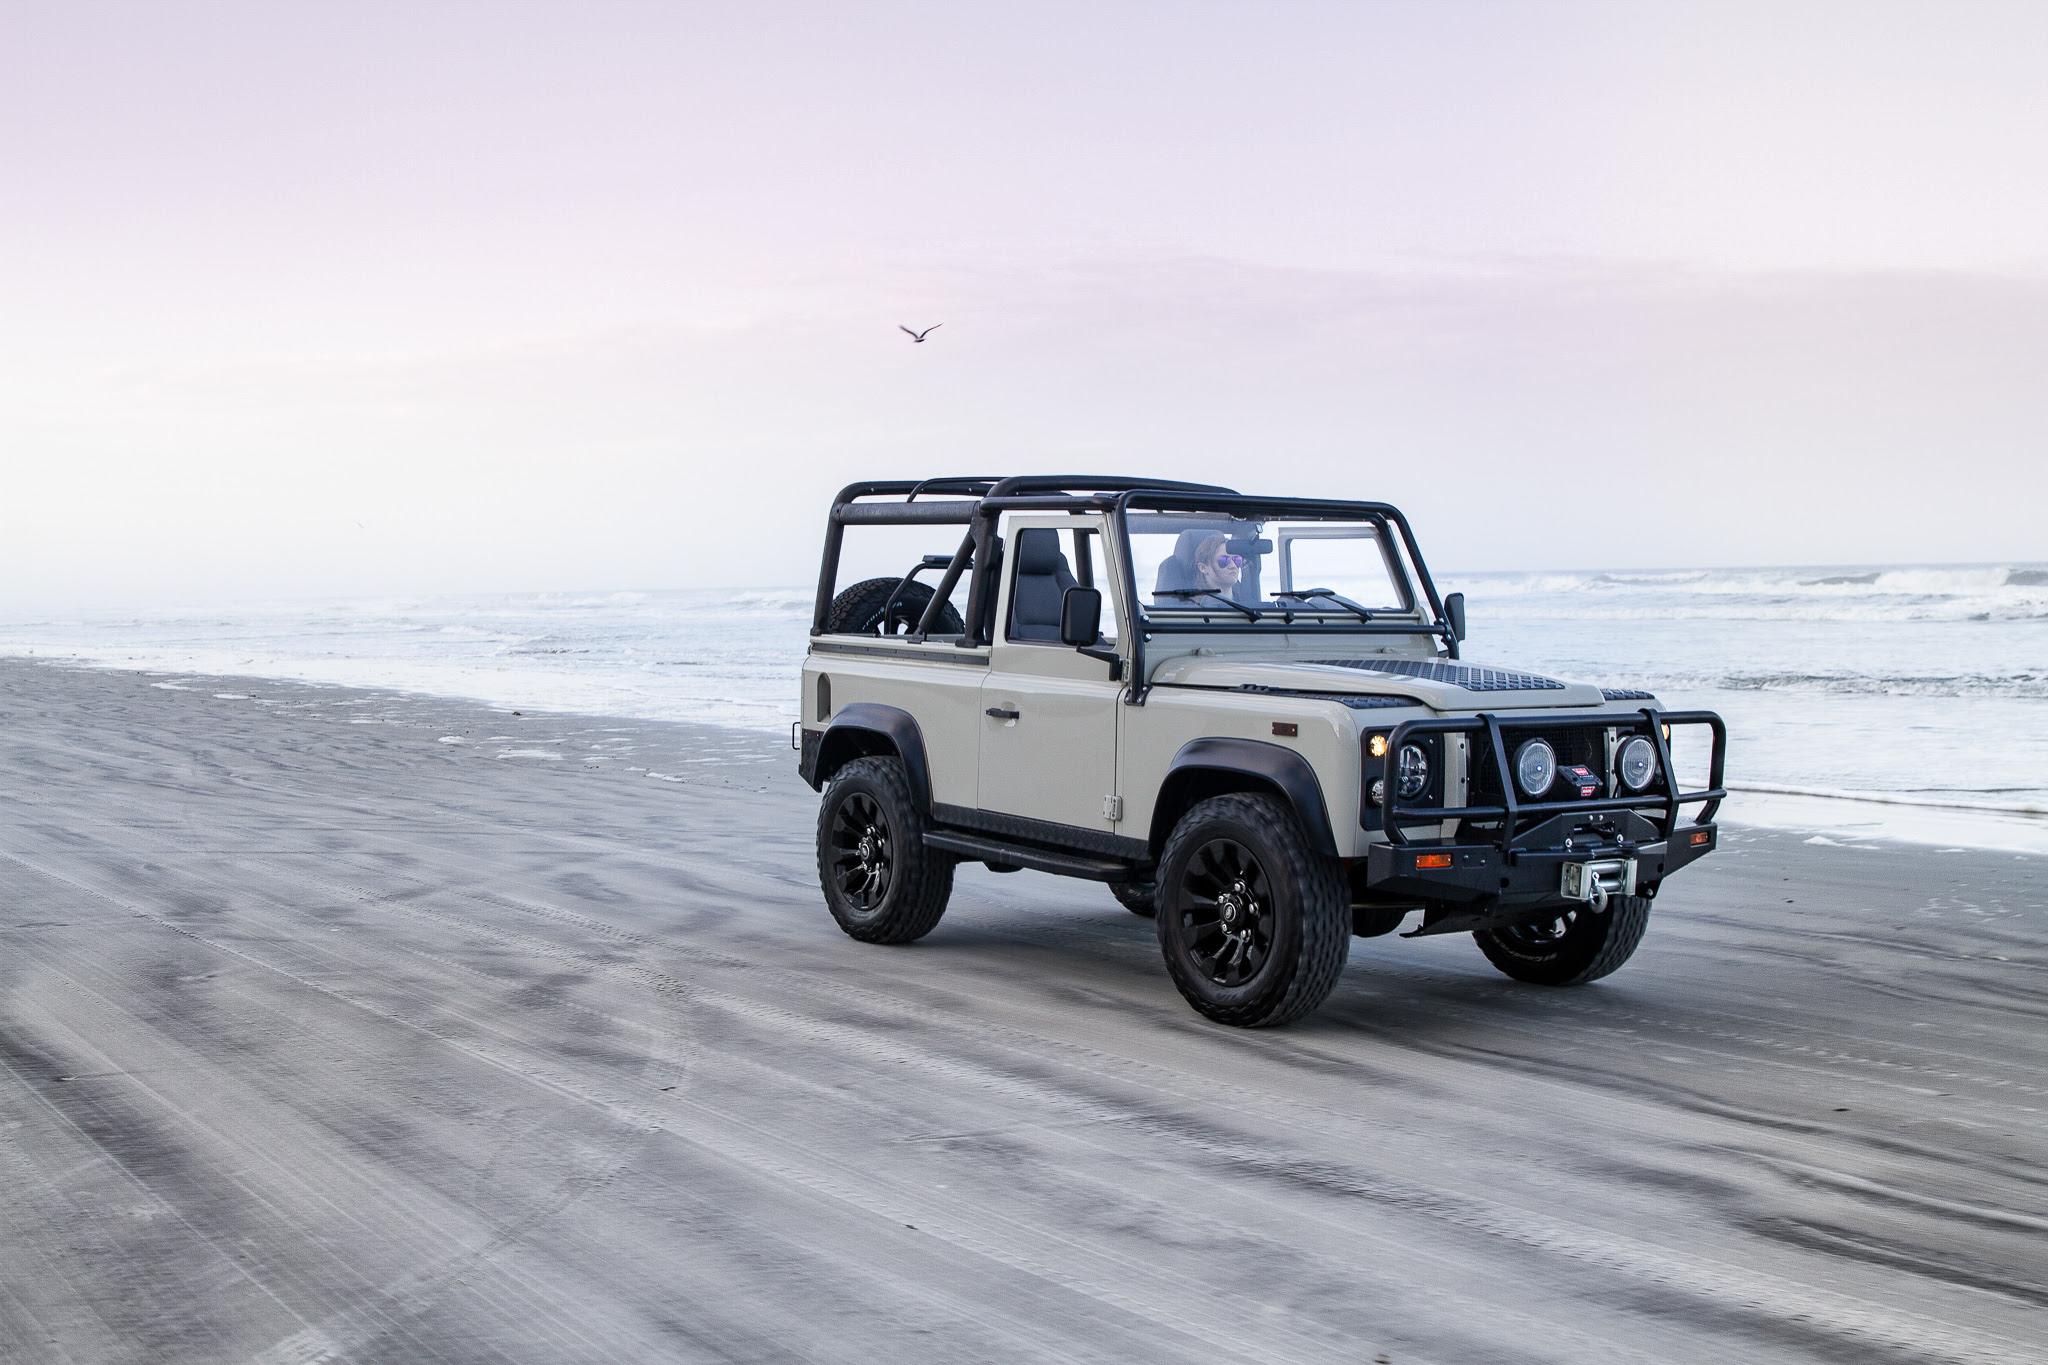 Pure Off-Road Fun is Shifting Gears in a 430-hp Corvette-Powered Custom Defender 90 Convertible